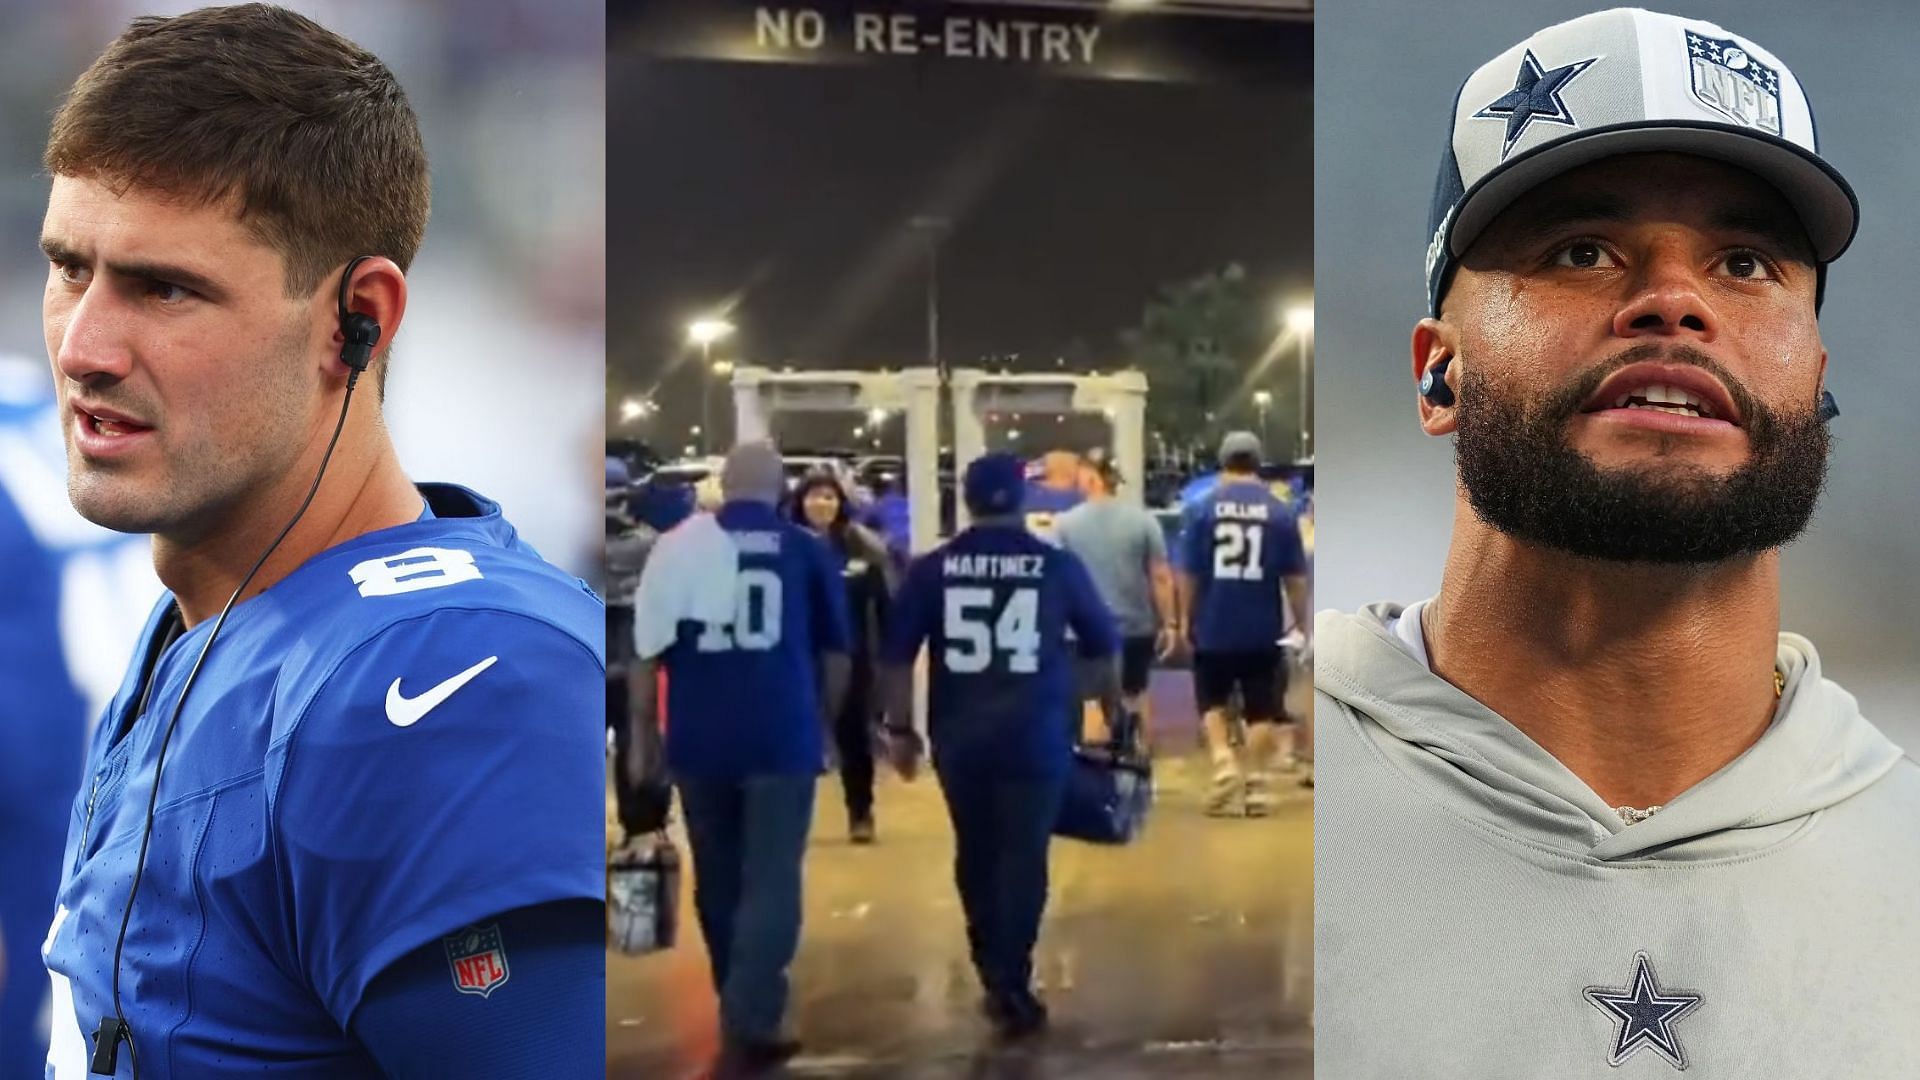 Fans leave early after a disappointing performance by Daniel Jones and the New York Giants against Dak Prescott and the Dallas Cowboys.